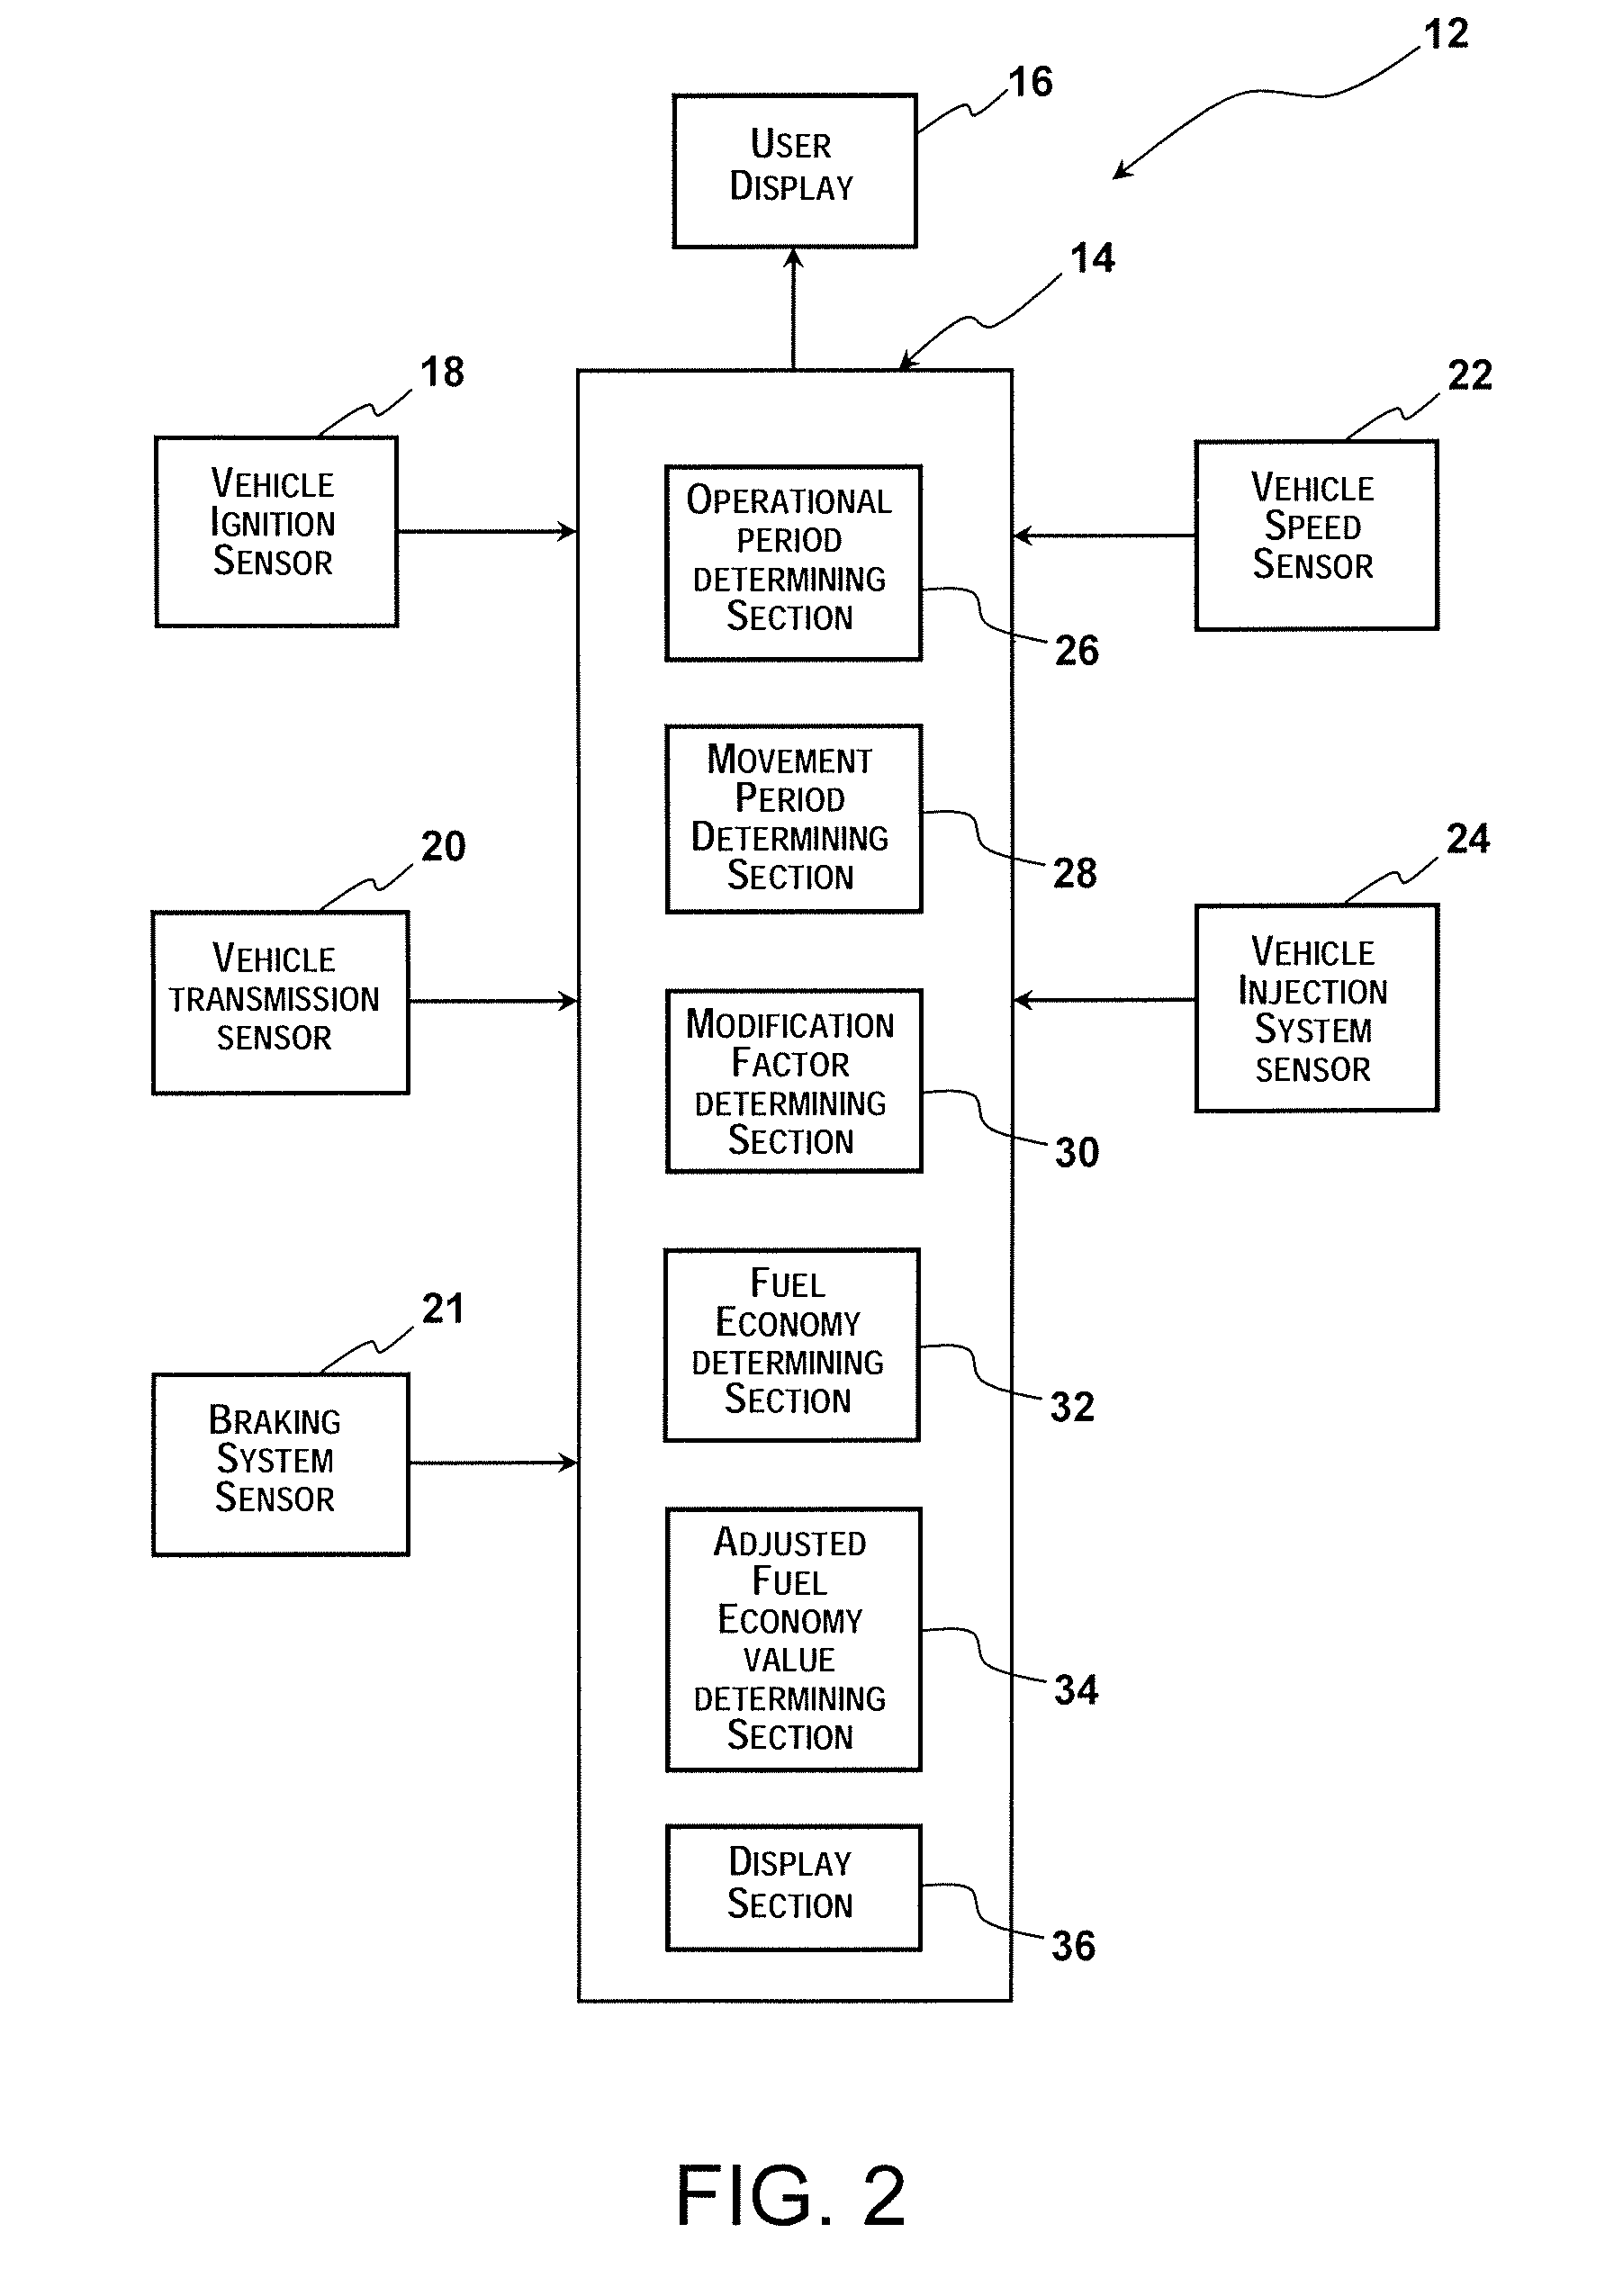 Vehicle information system